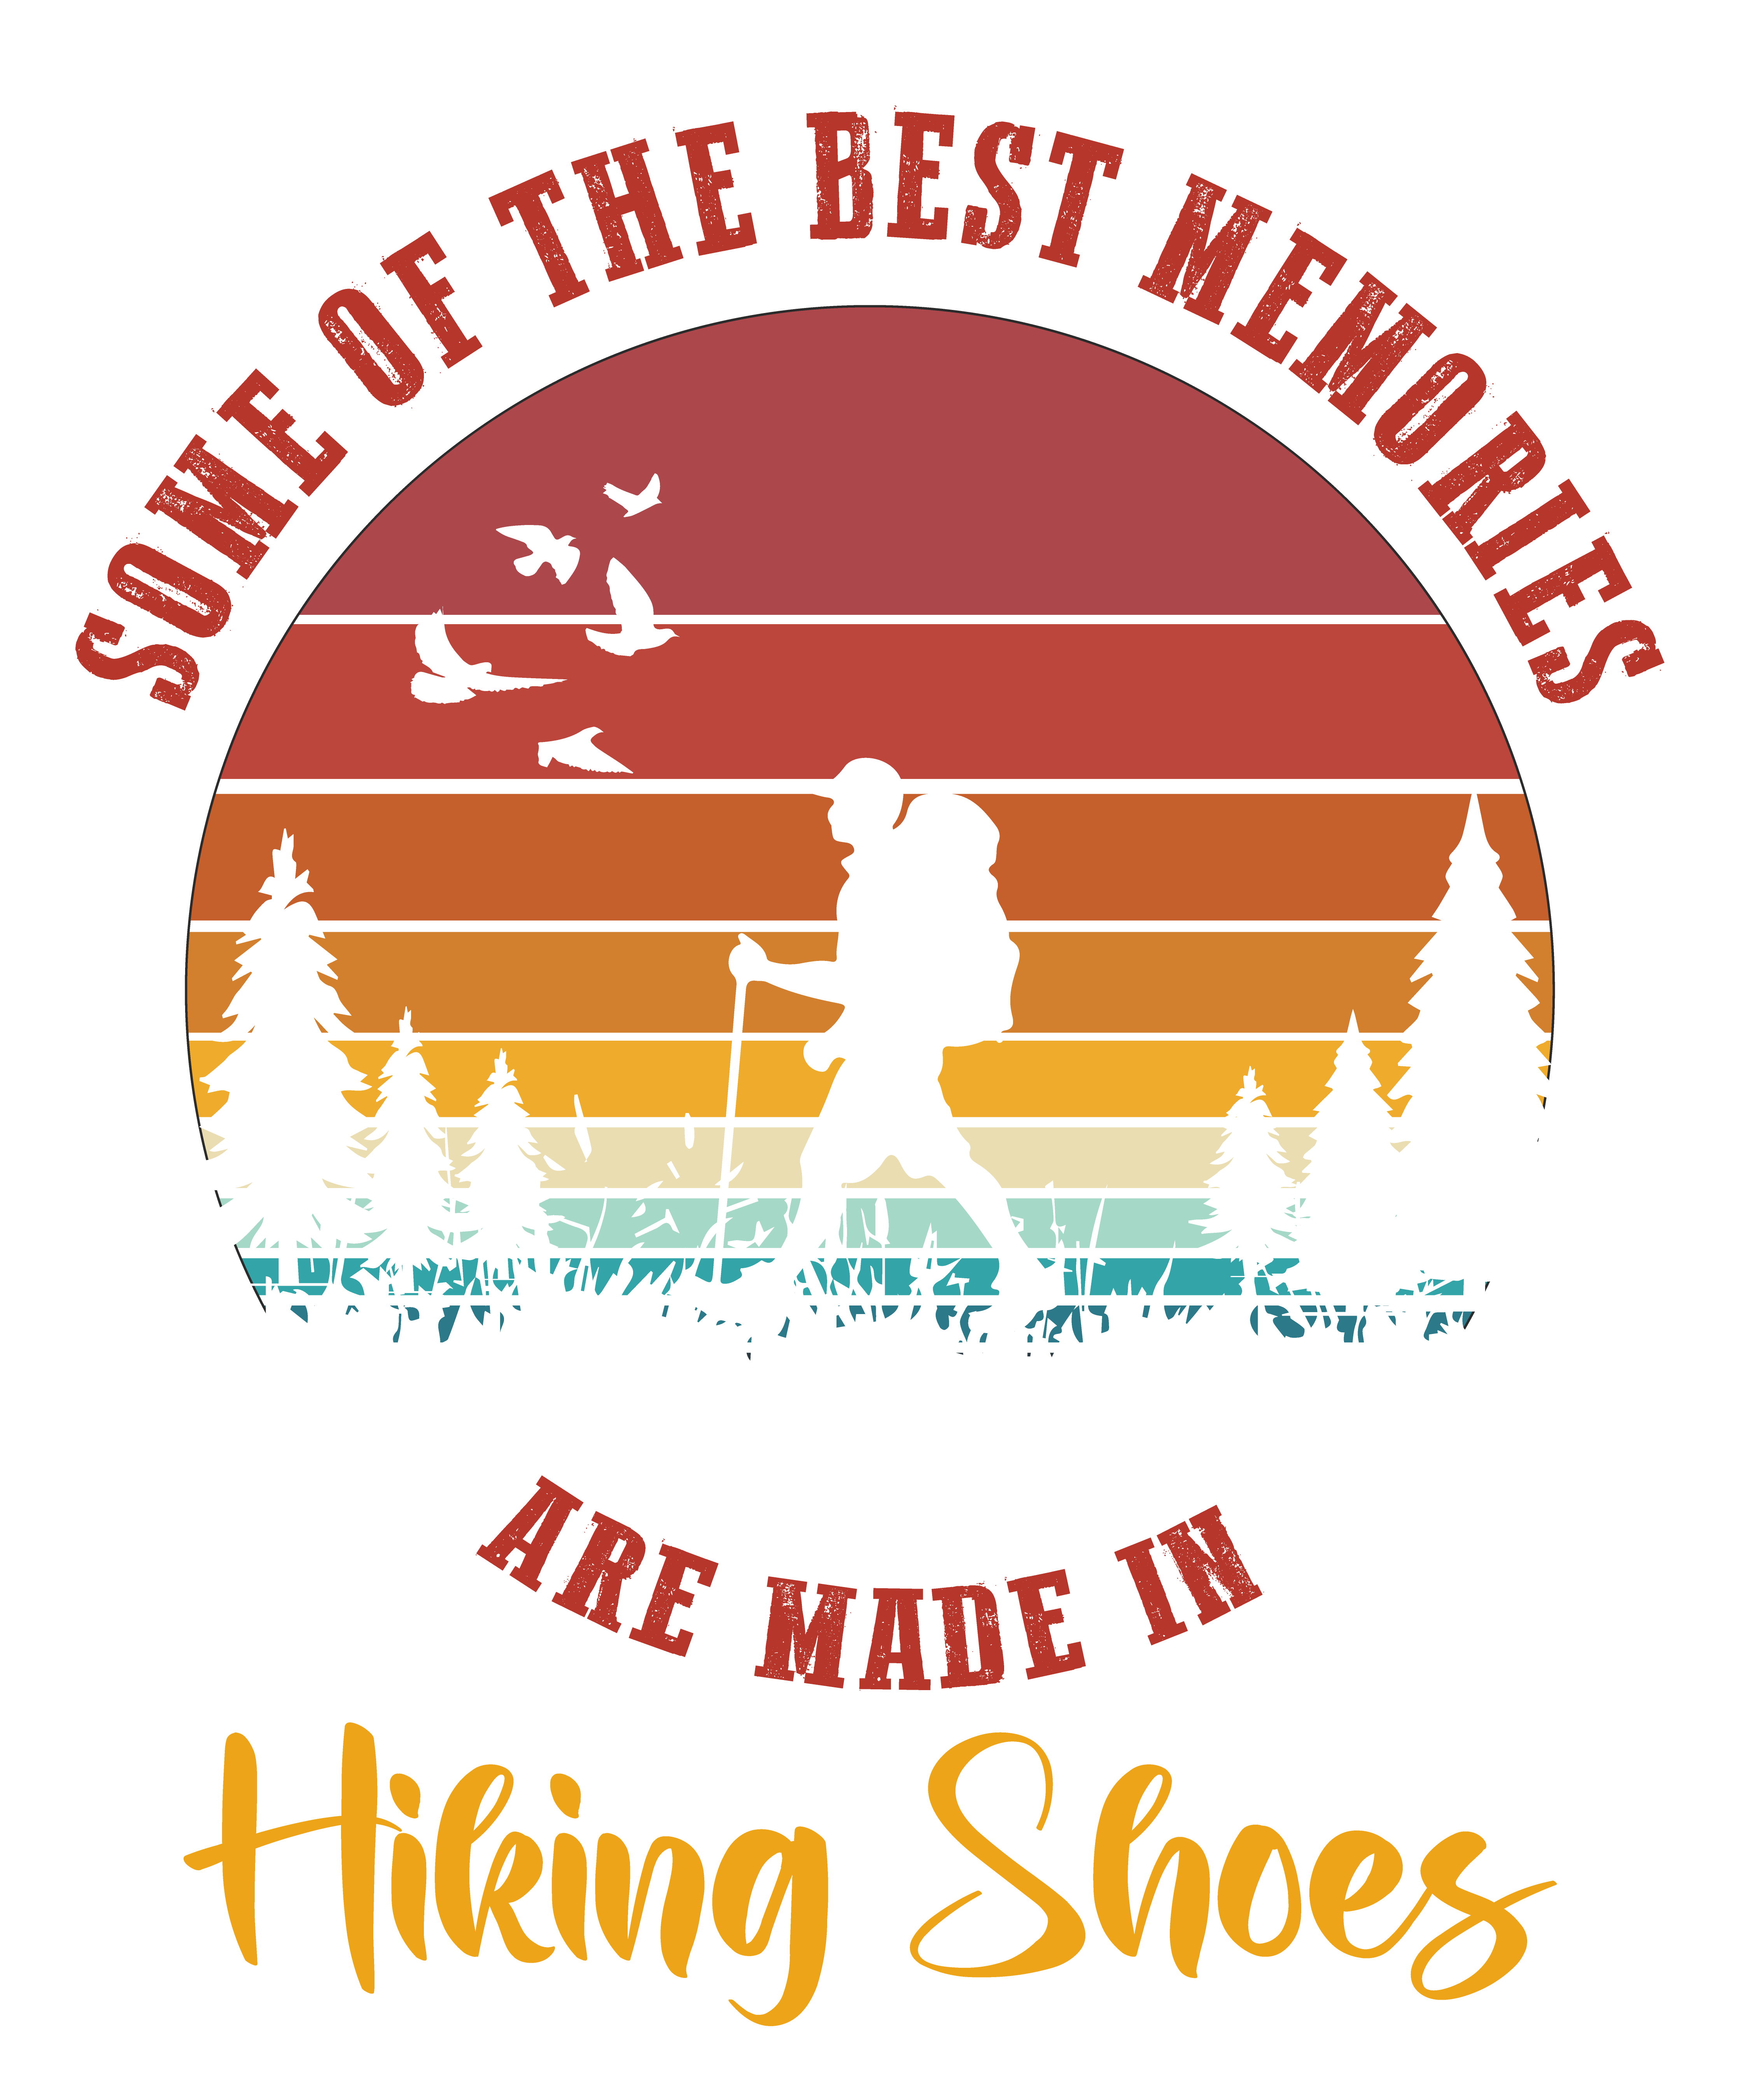 Some of the best memories are made in hiking shoes t shirt design